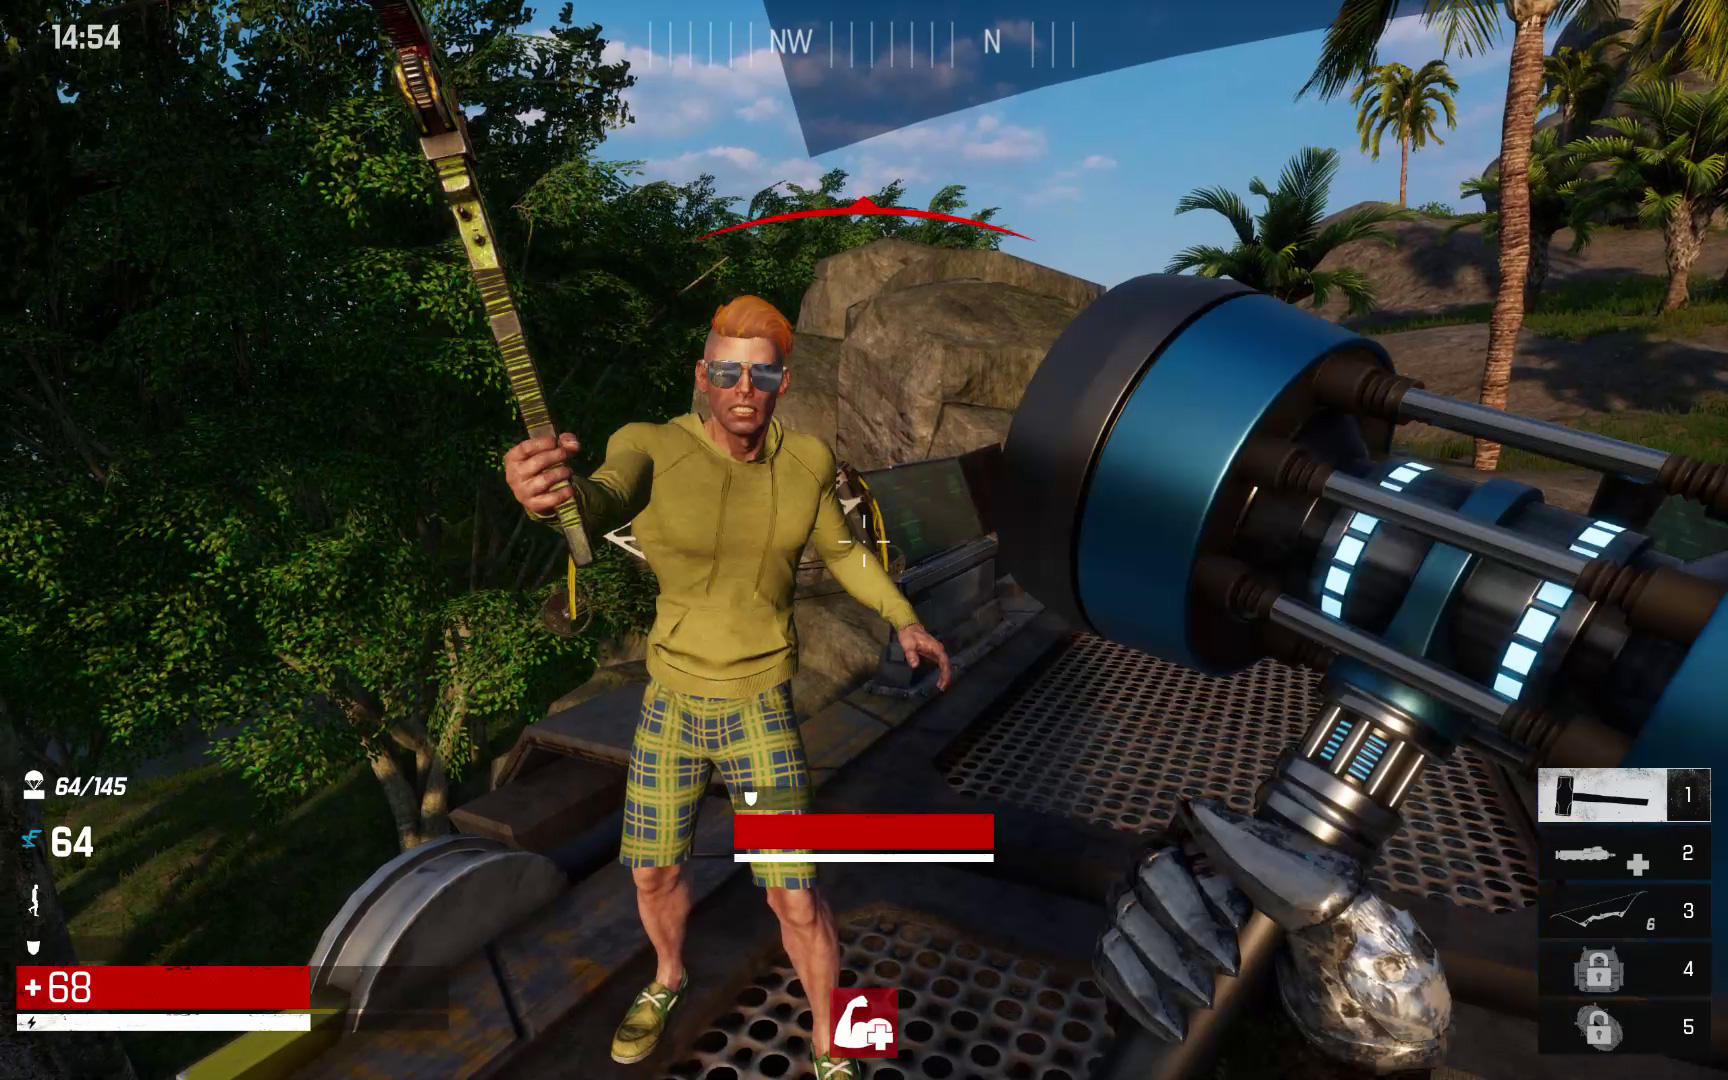 Battle Royale Game 'The Culling' Returns With A Ridiculous New